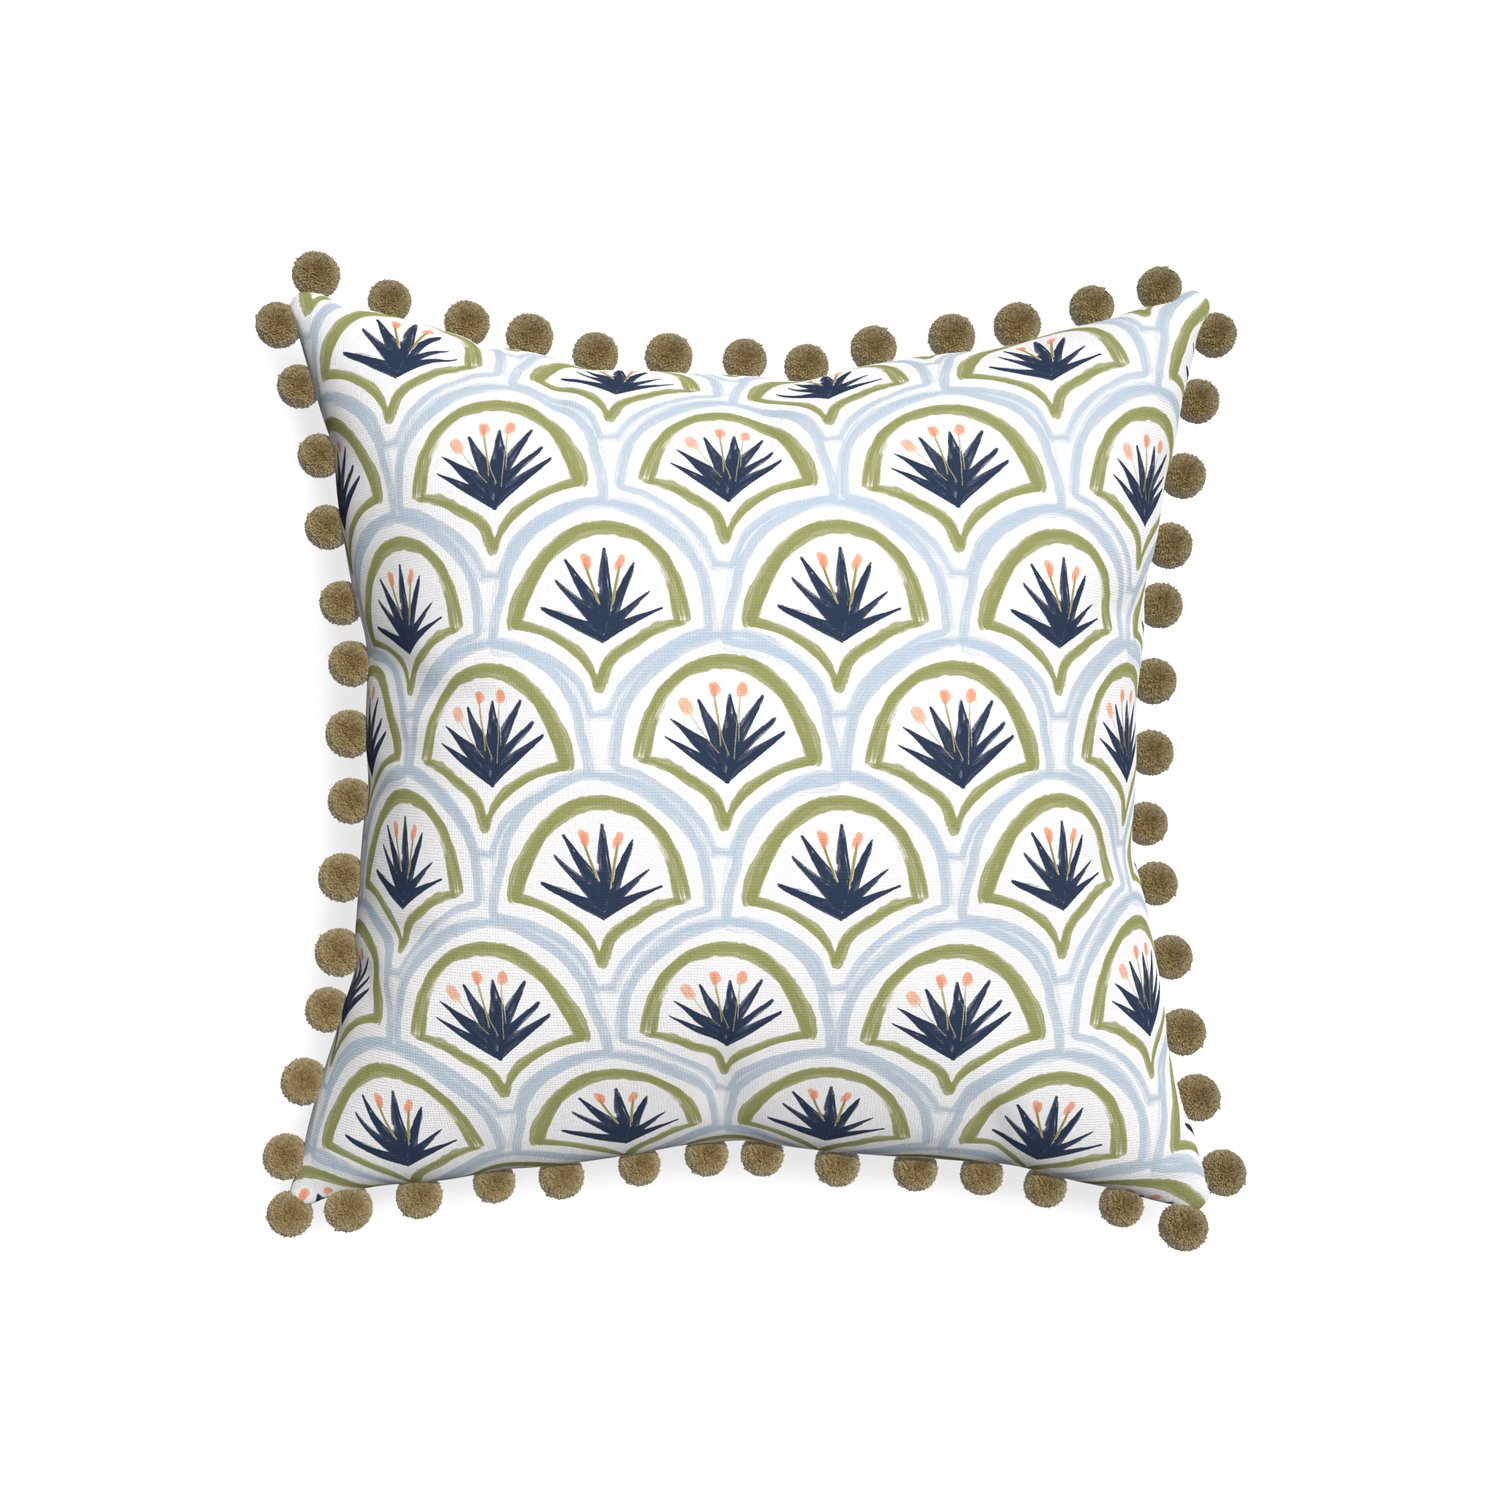 20-square thatcher midnight custom art deco palm patternpillow with olive pom pom on white background